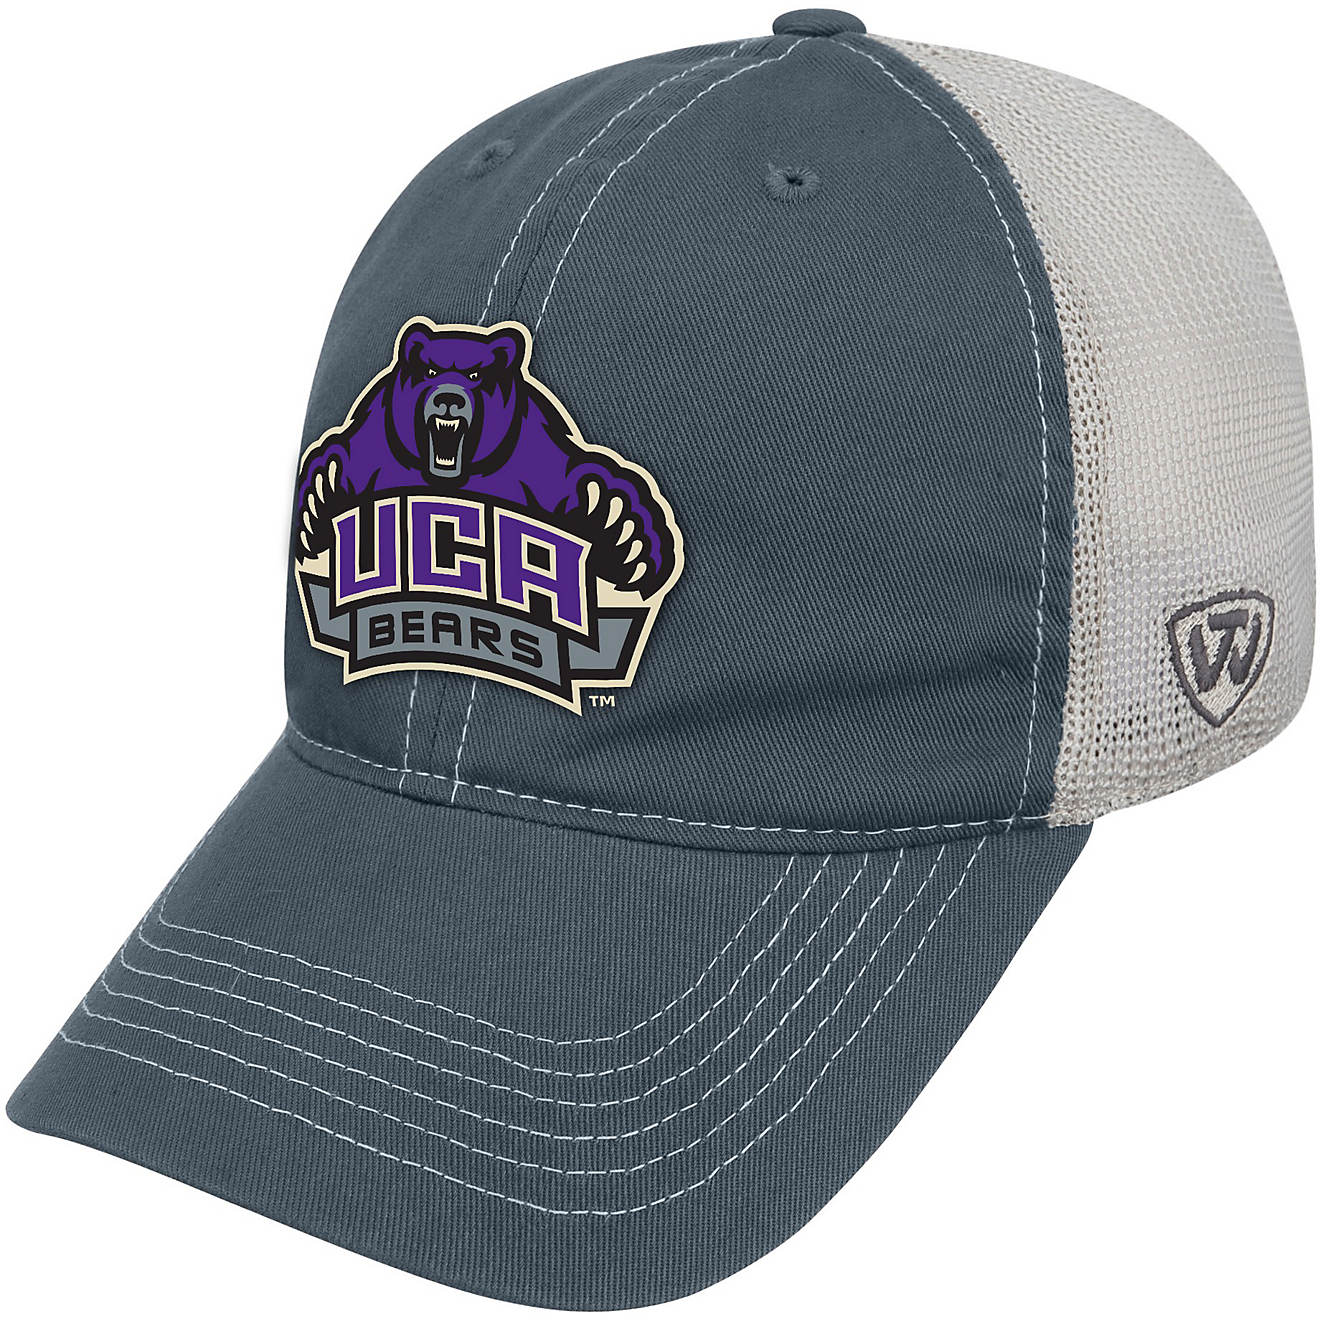 Top of the World Men's University of Central Arkansas Putty Cap                                                                  - view number 1